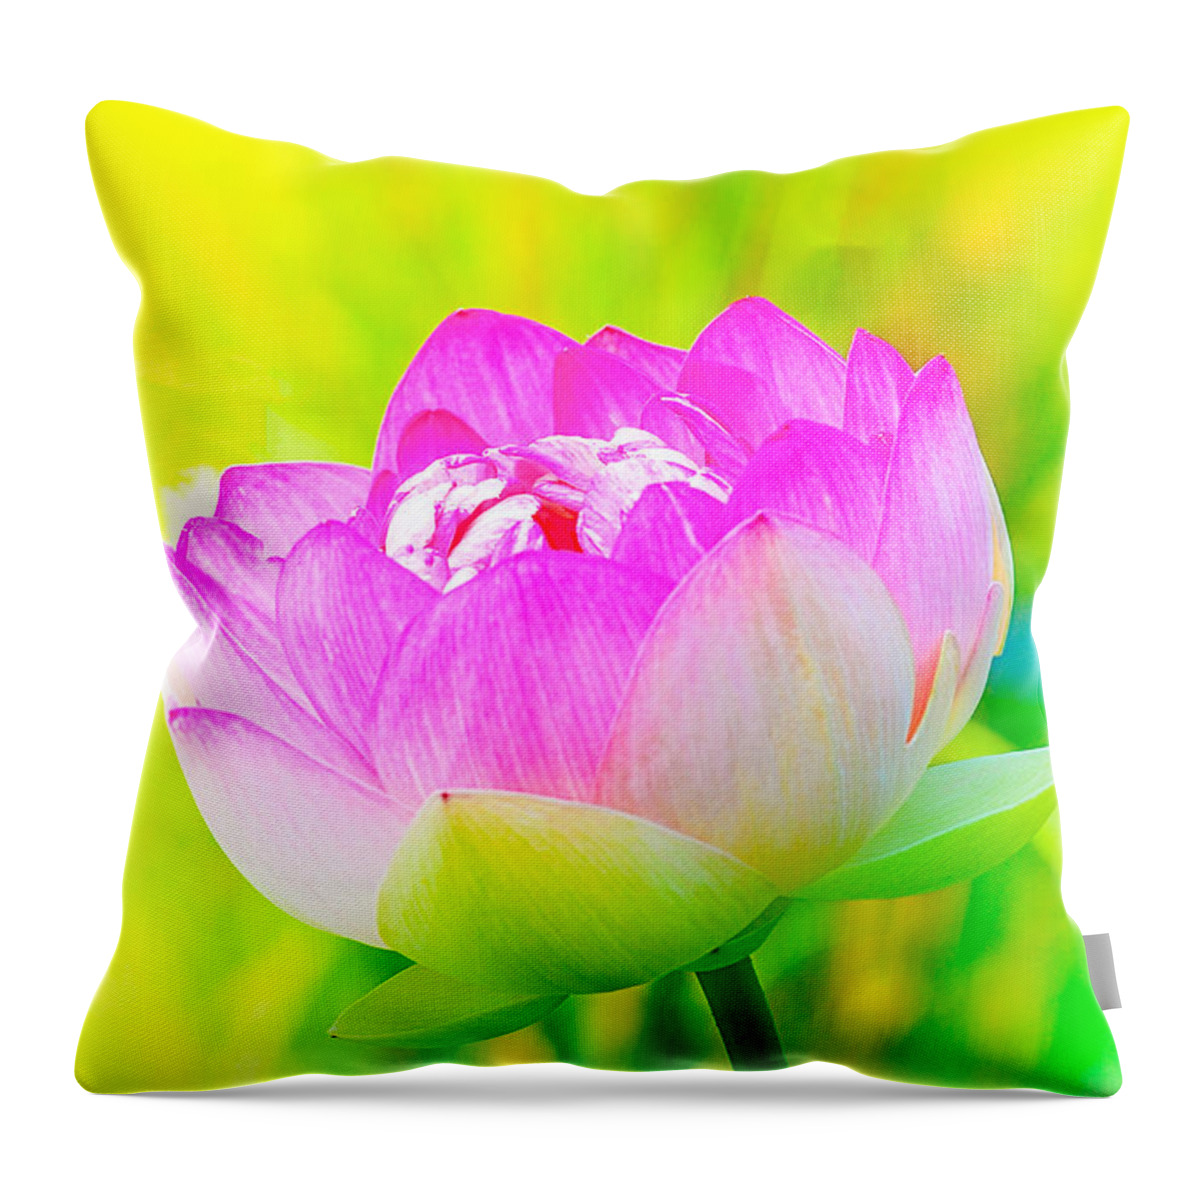 Lotus Flowers Throw Pillow featuring the photograph Lotus by Michael Hubley